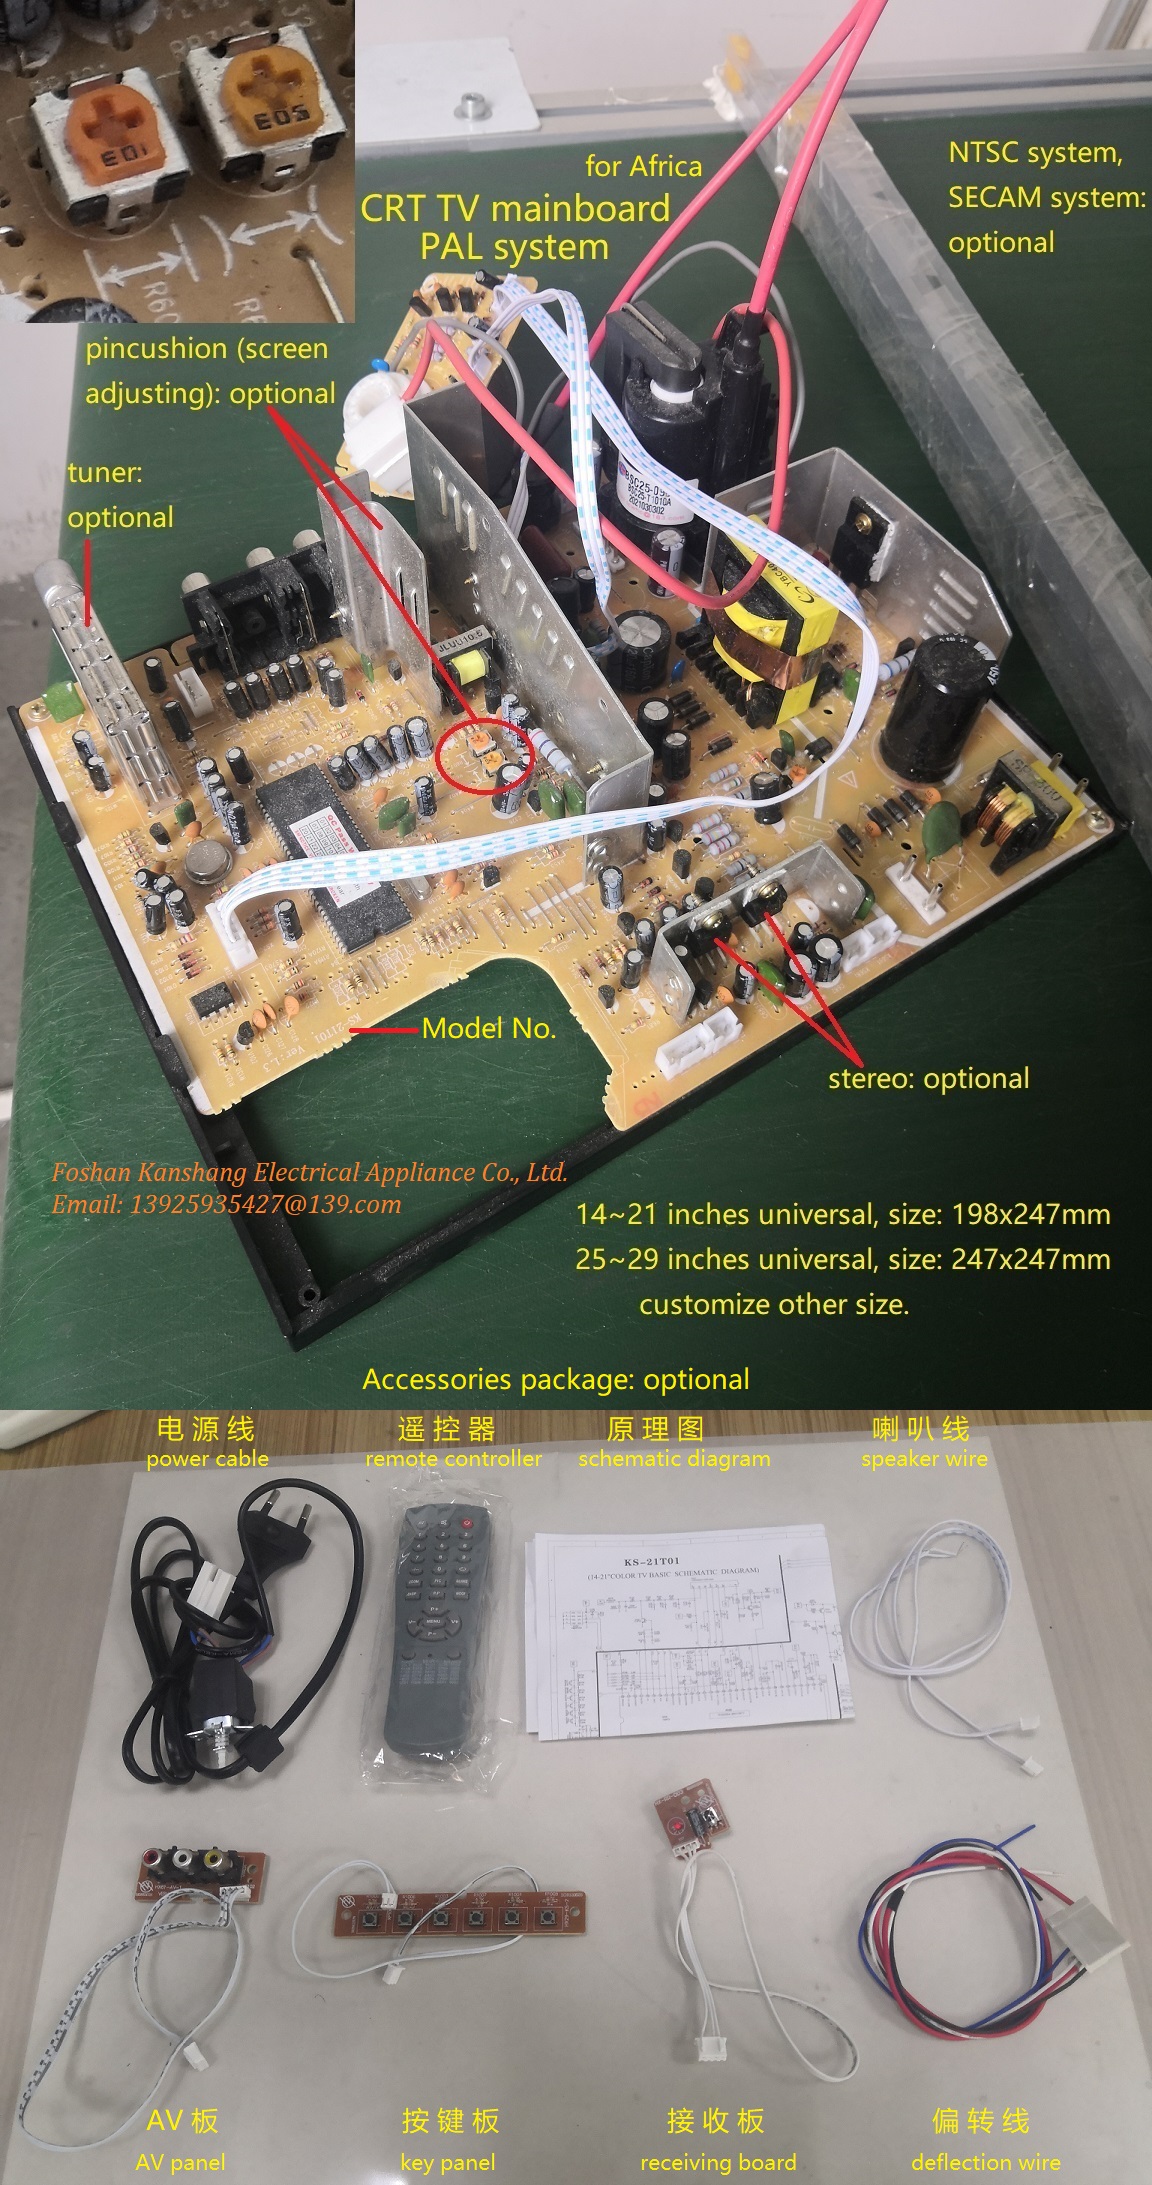 Africa CRT TV mainboard and accessories package.jpg